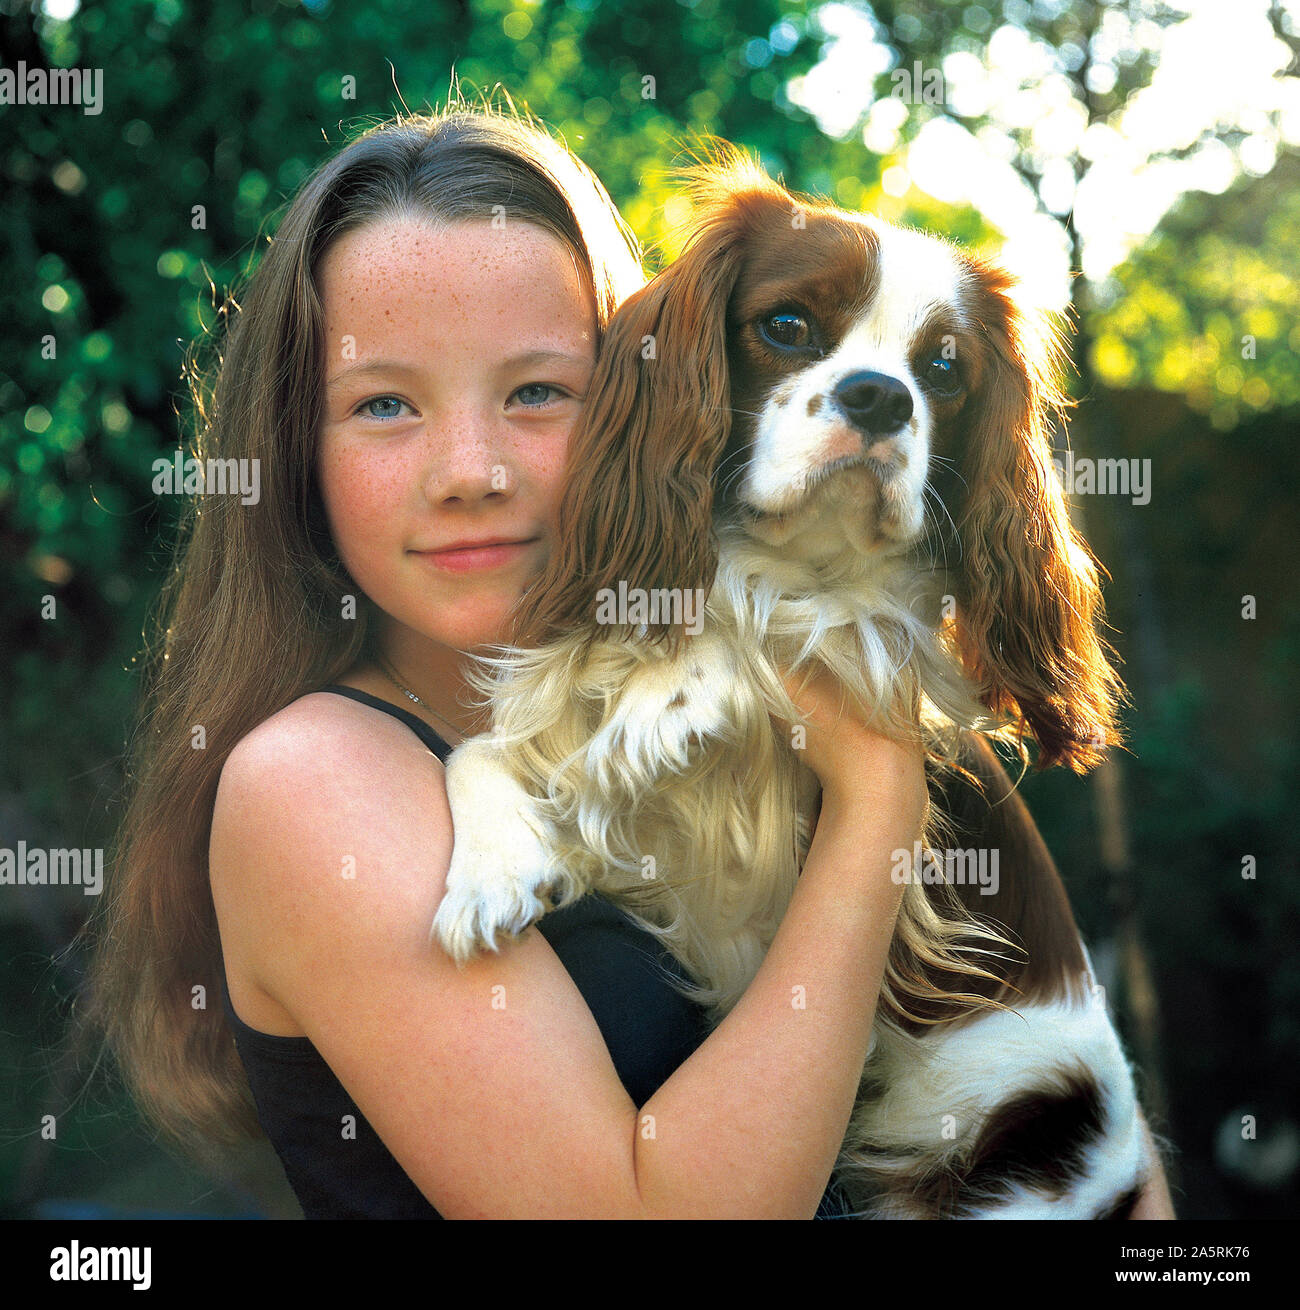 Icelandic young girl with her dog, a King Charles Spaniel, Iceland Stock Photo